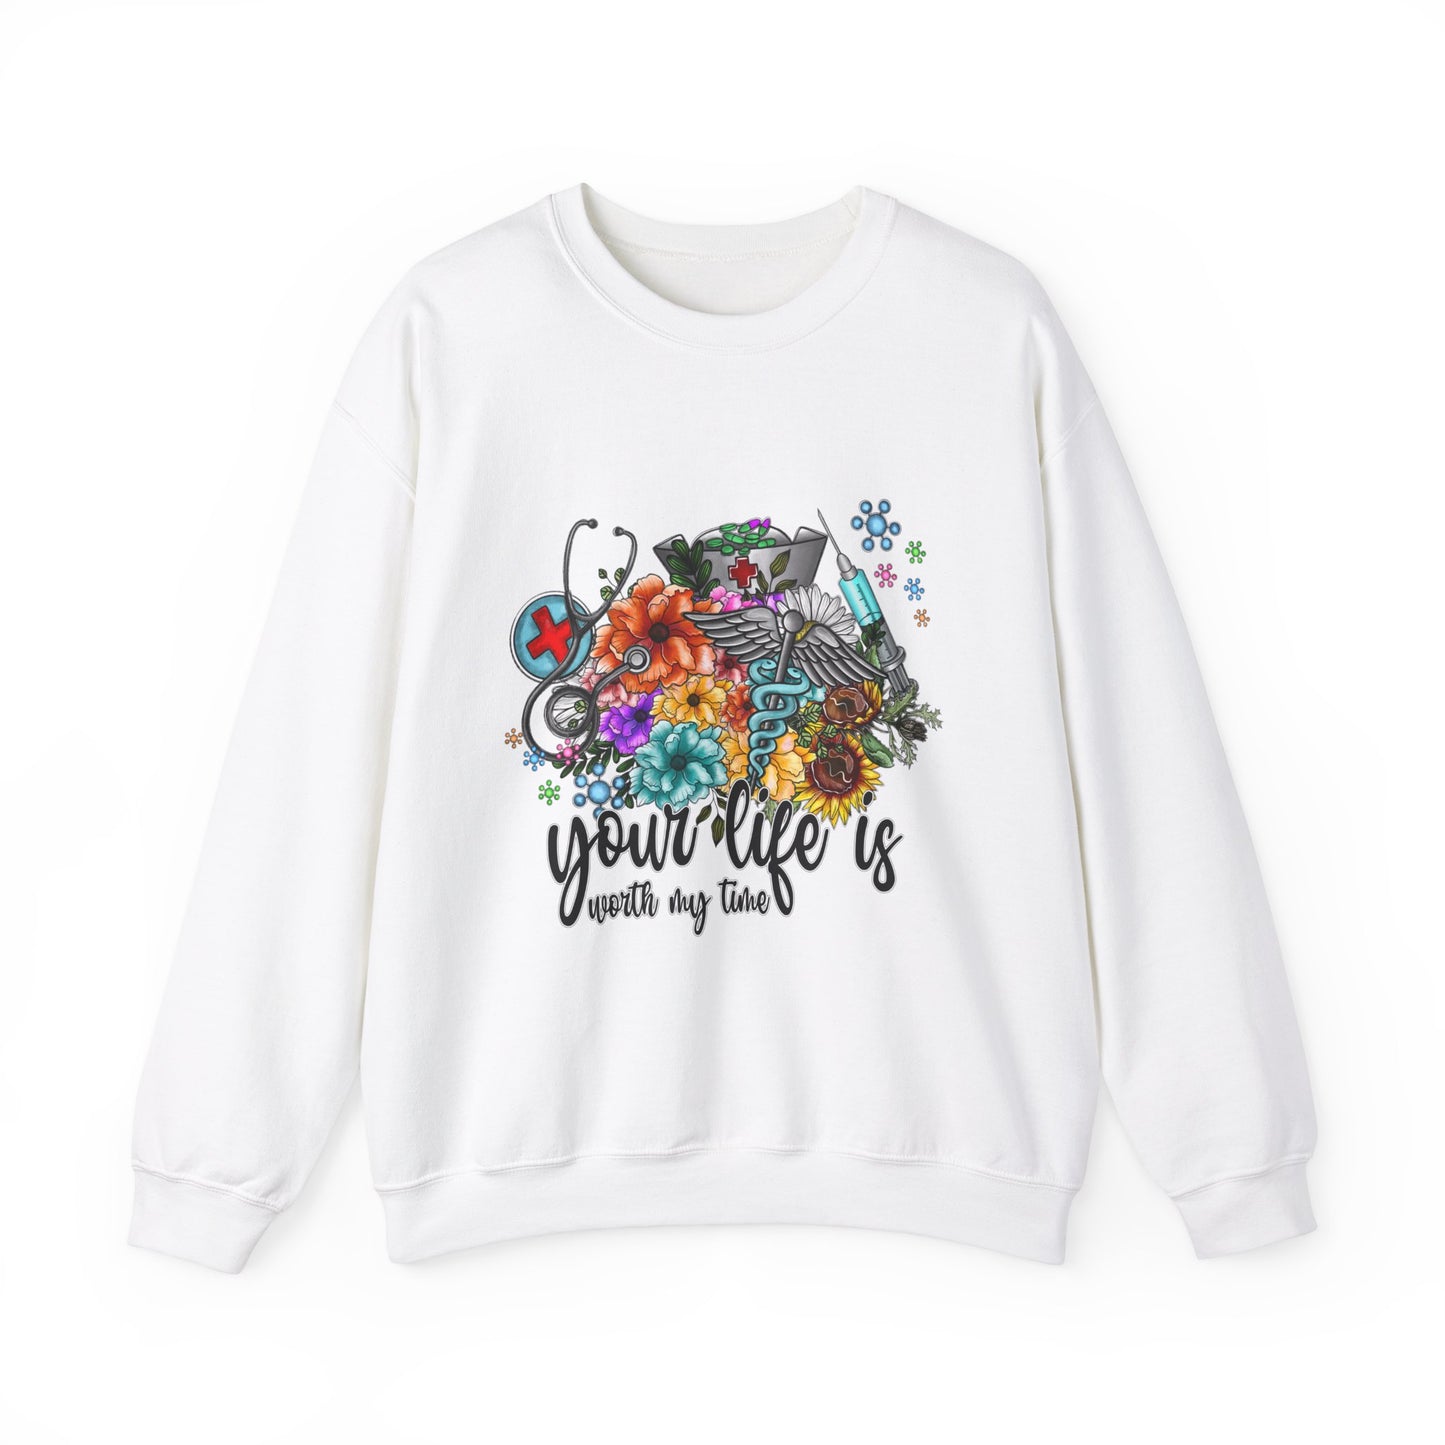 Your Life is Worth My Time Sweatshirt